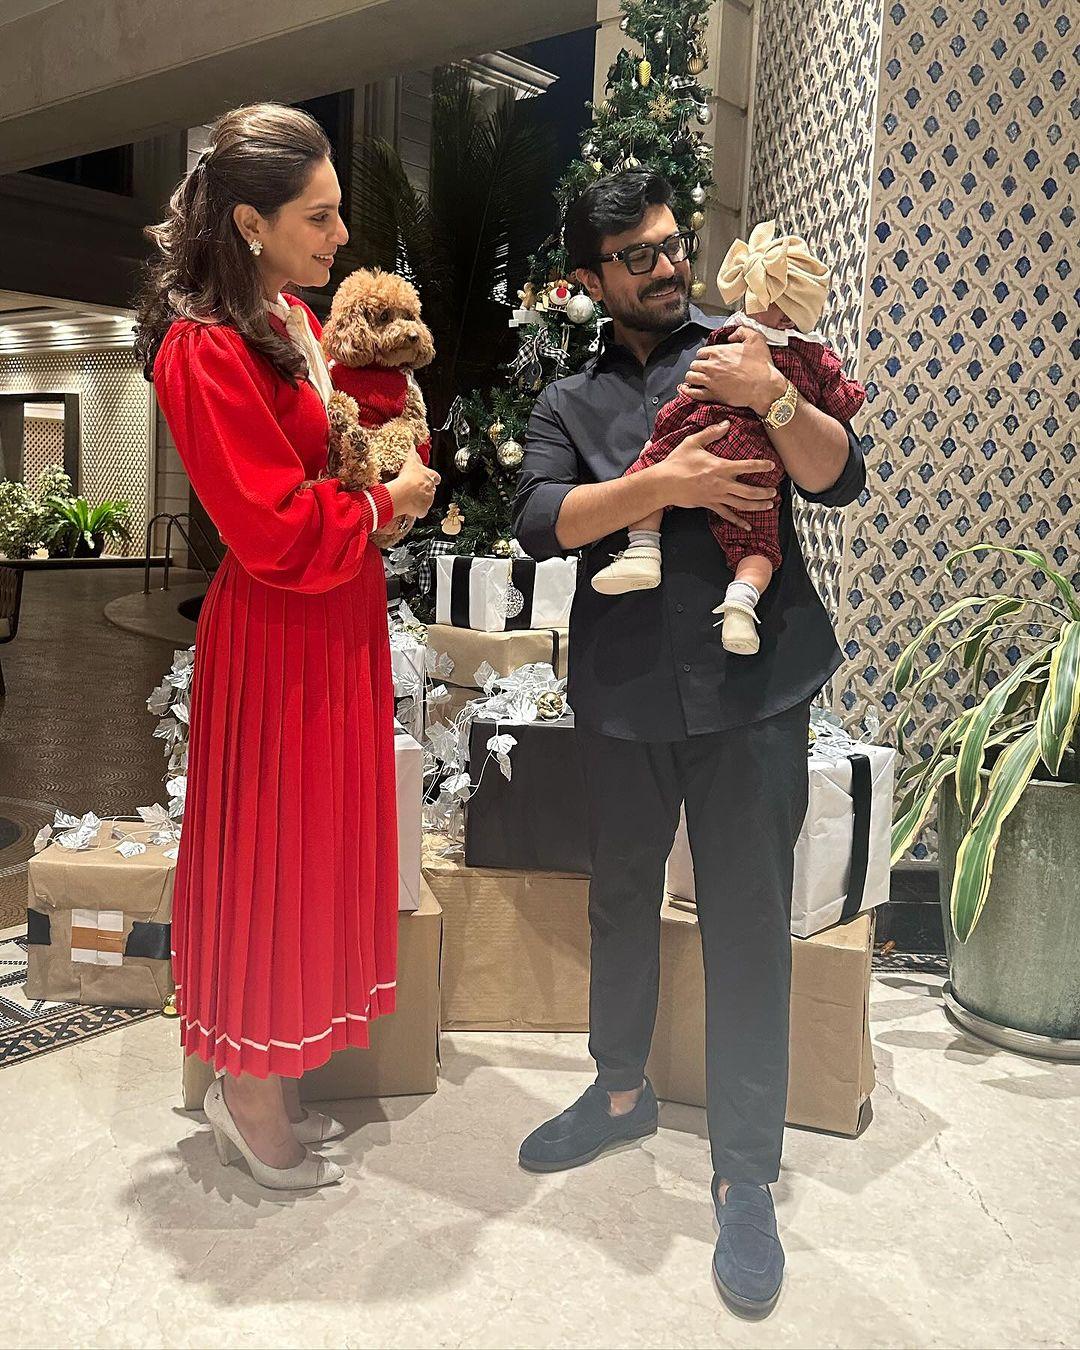 Ram Charan and his wife Upasana shared a glimpse of their joyous Christmas celebration on Instagram, showcasing a special family occasion with their newborn daughter, Klin Kaara, who just turned six months